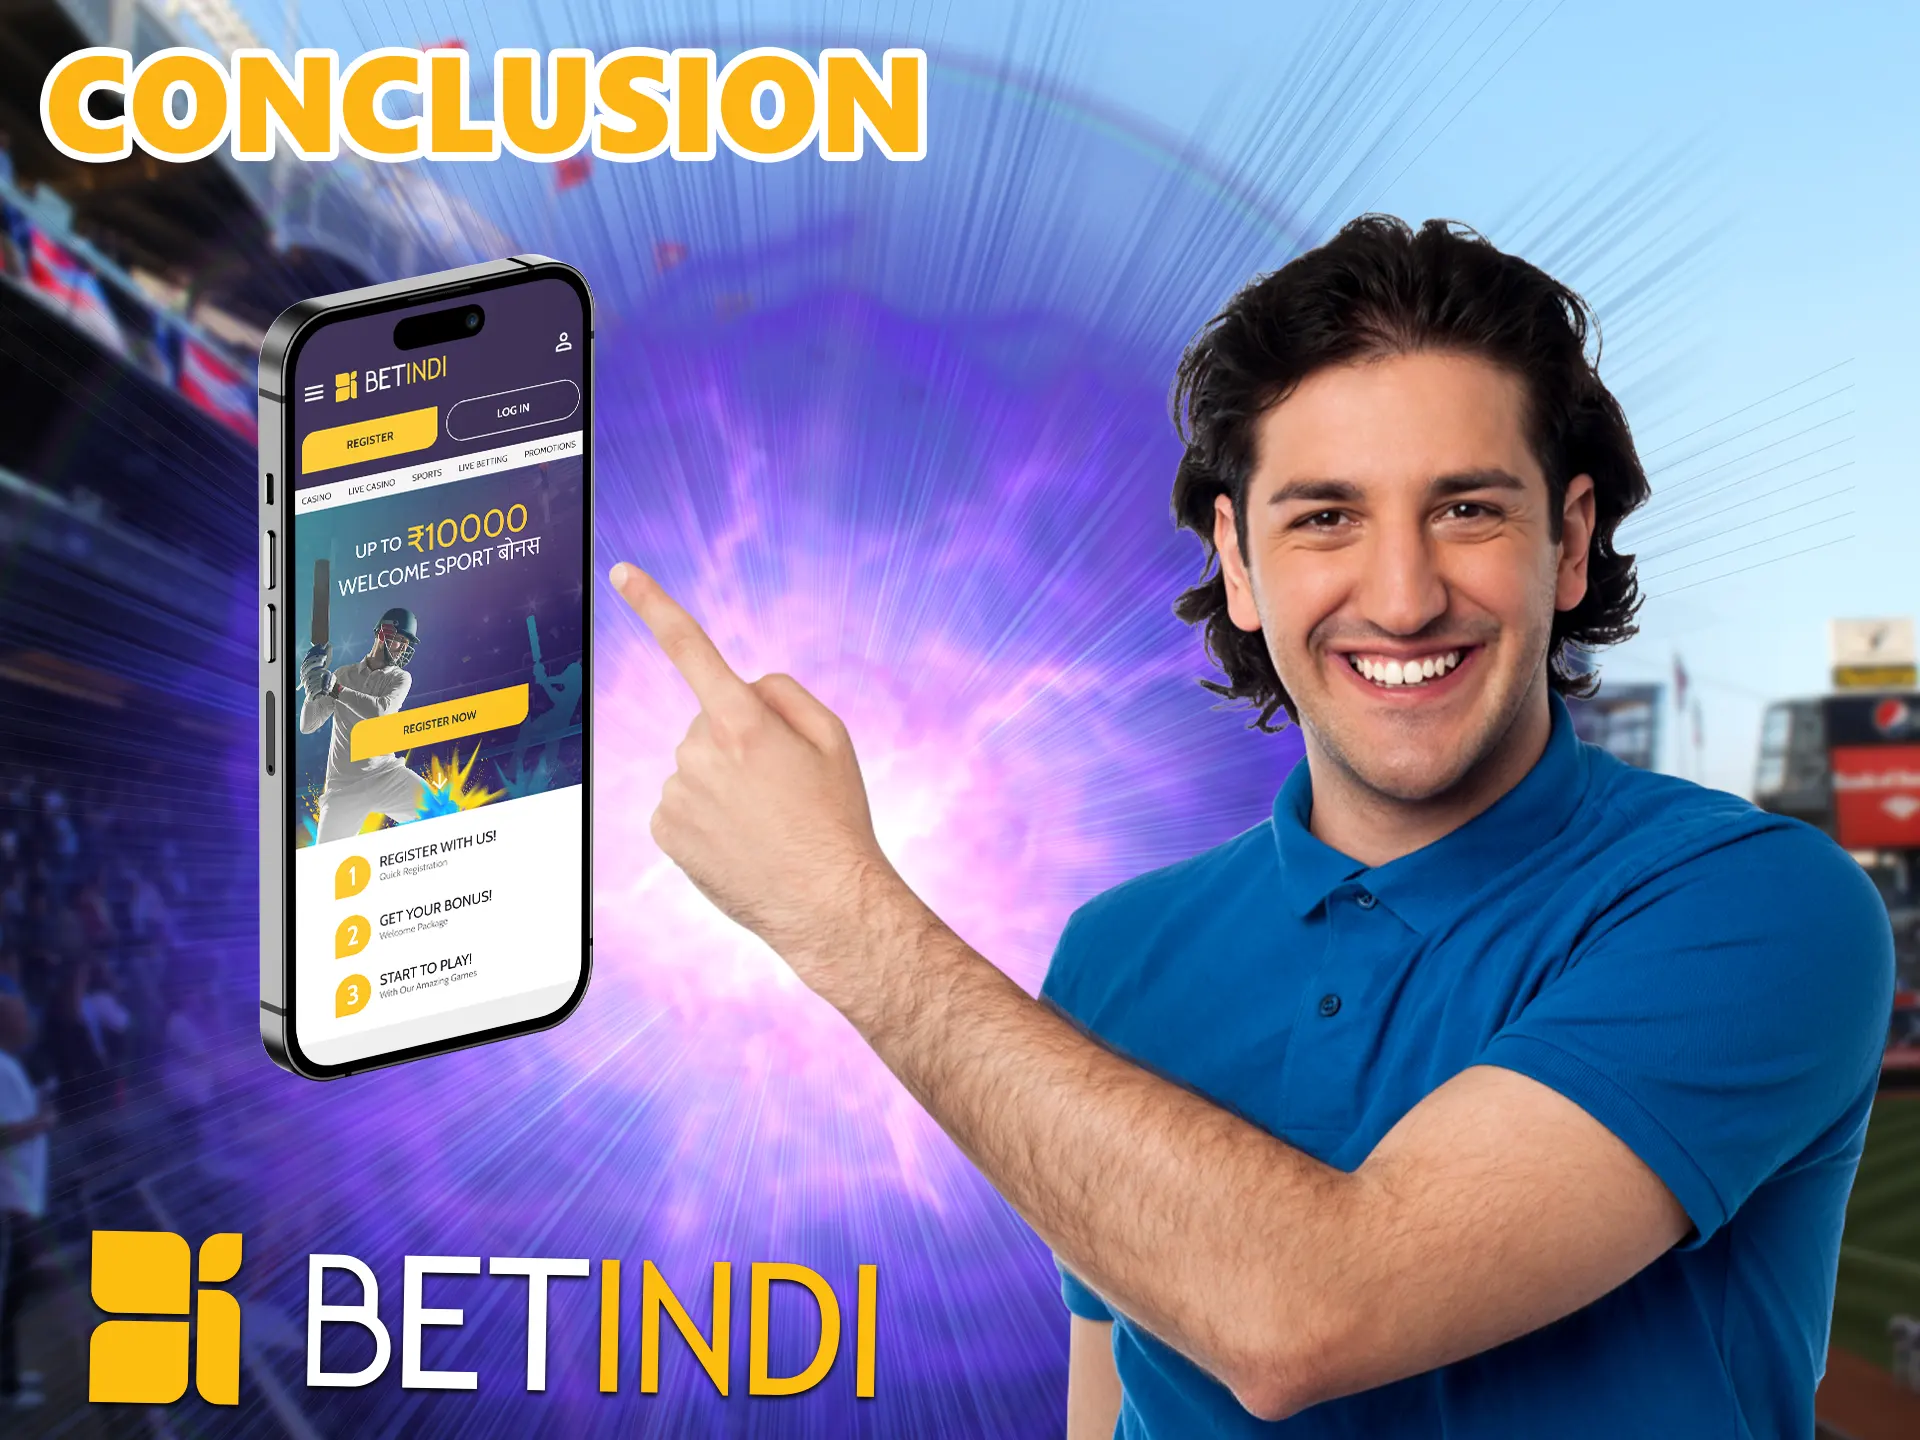 BetIndi mobile app is a great option for both beginners and advanced players, bookmaker competes with the giants of the gambling industry which we can safely recommend to download.